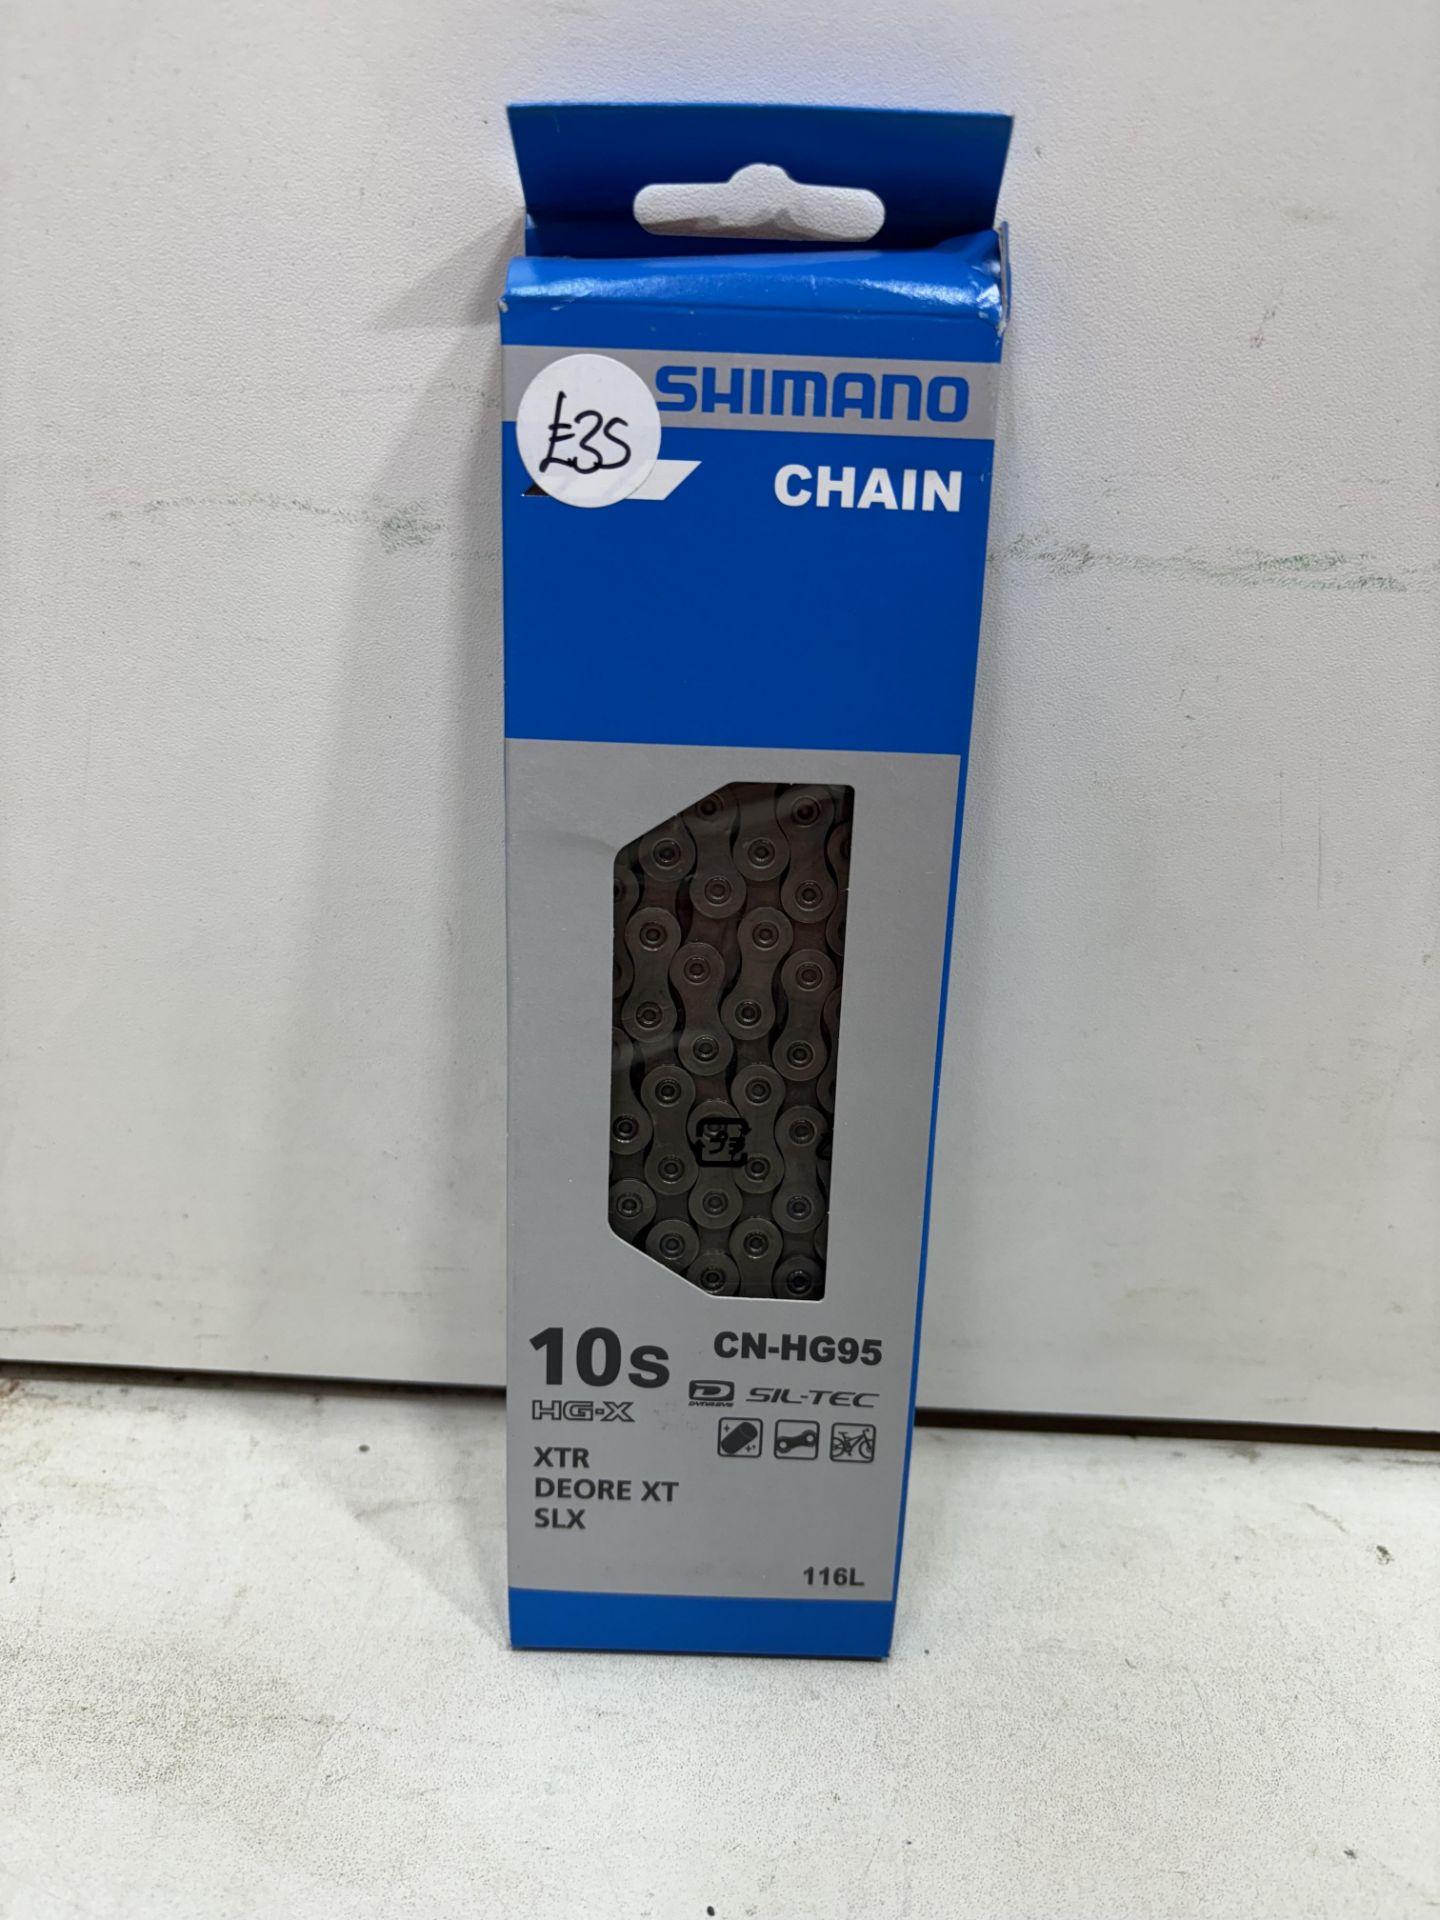 4 x Shimano CN-HG95 Deore XT 10-Speed Mountain Bicycle Chains,116 Links - Image 3 of 4